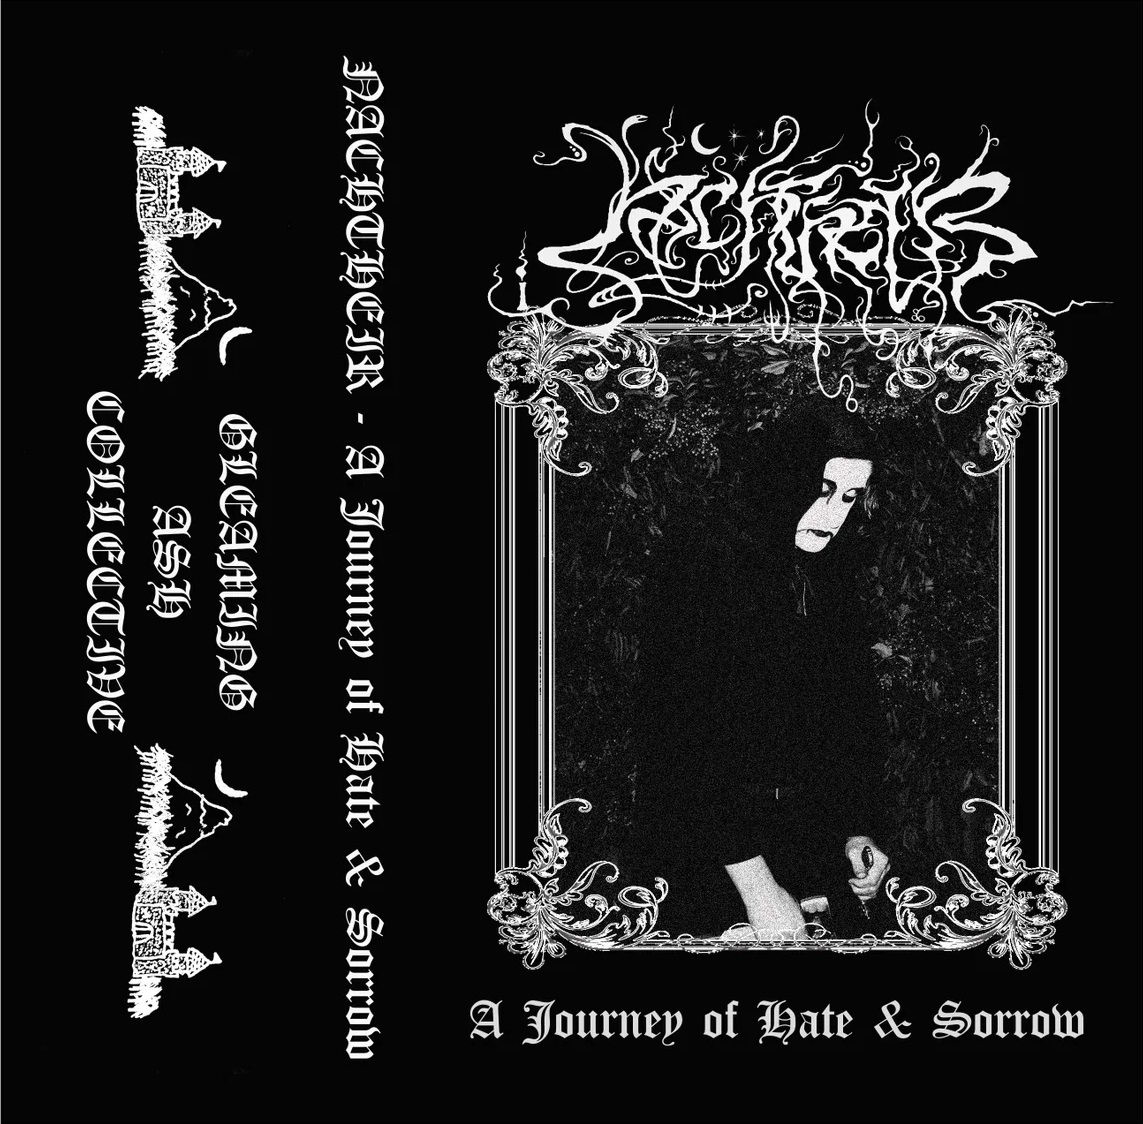 nachtheir – a journey of hate & sorrow [demo / re-release]